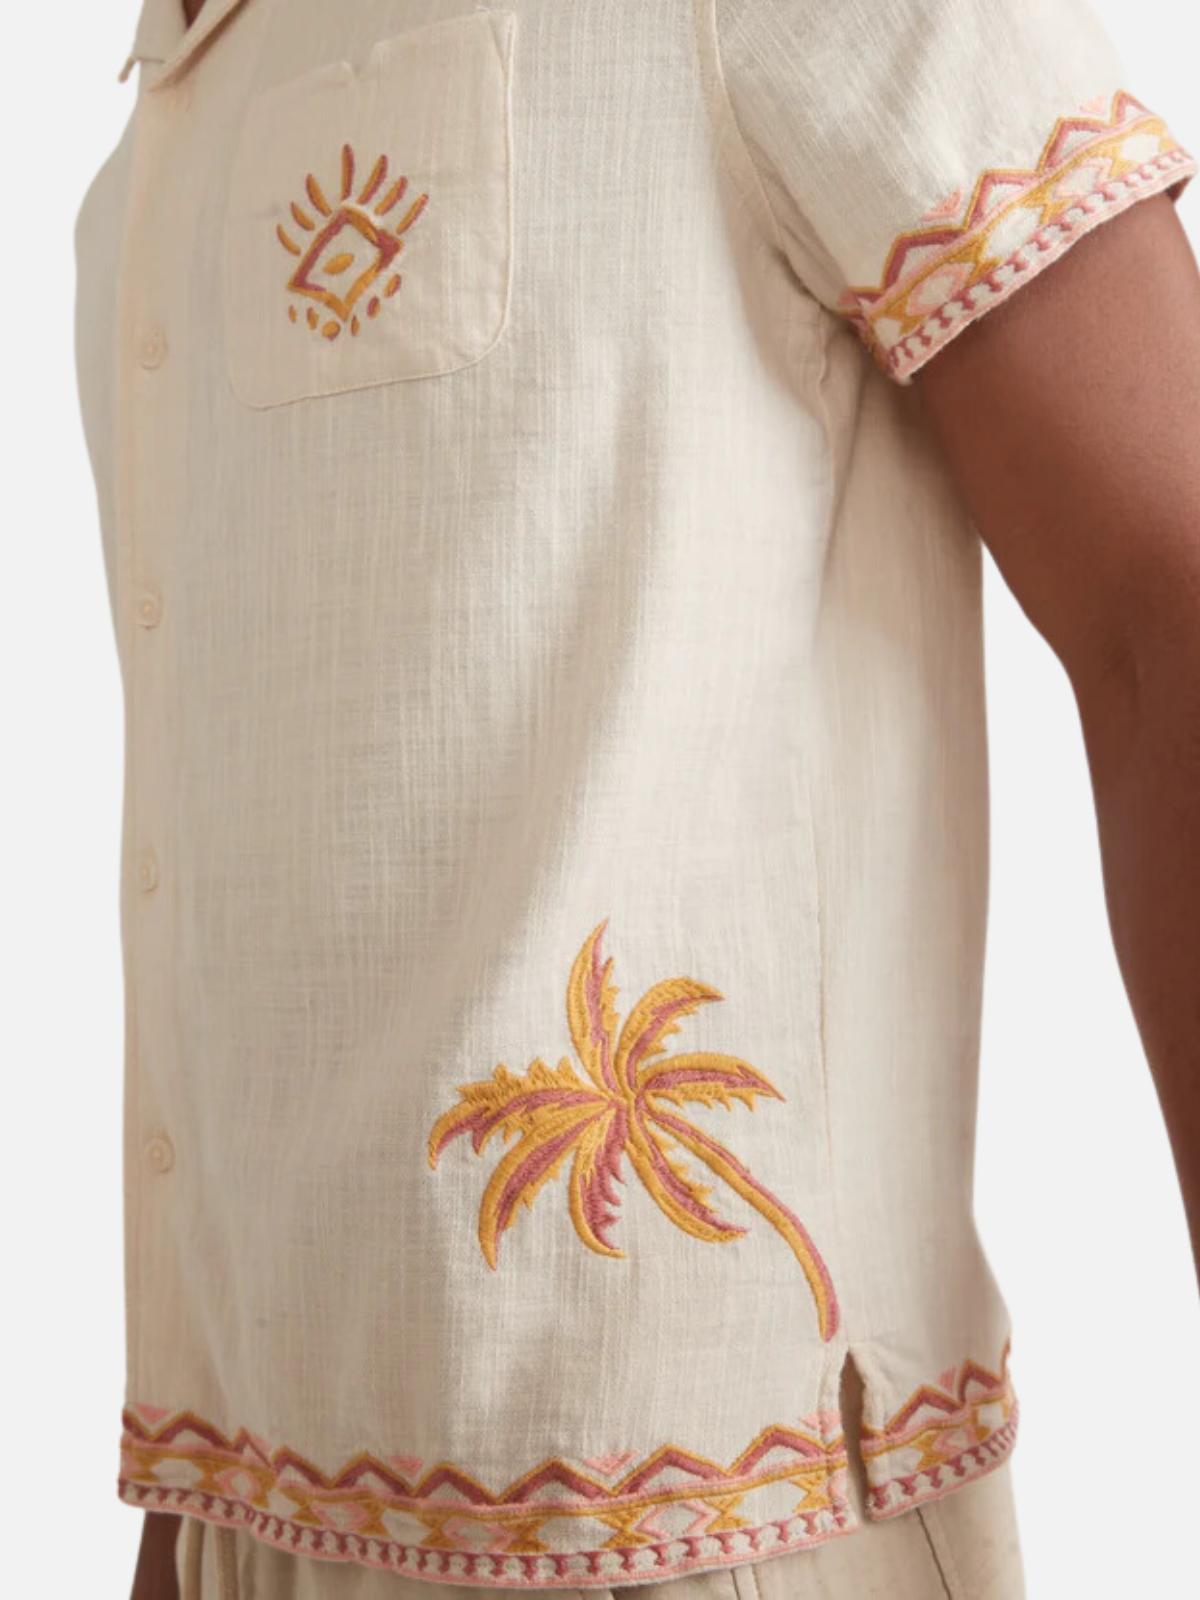 marine layer embroidered resort stretch selvage shirt natural coral cream white orange yellow pink camp cuban collar ss short sleeve button up kempt athens ga georgia men's clothing store